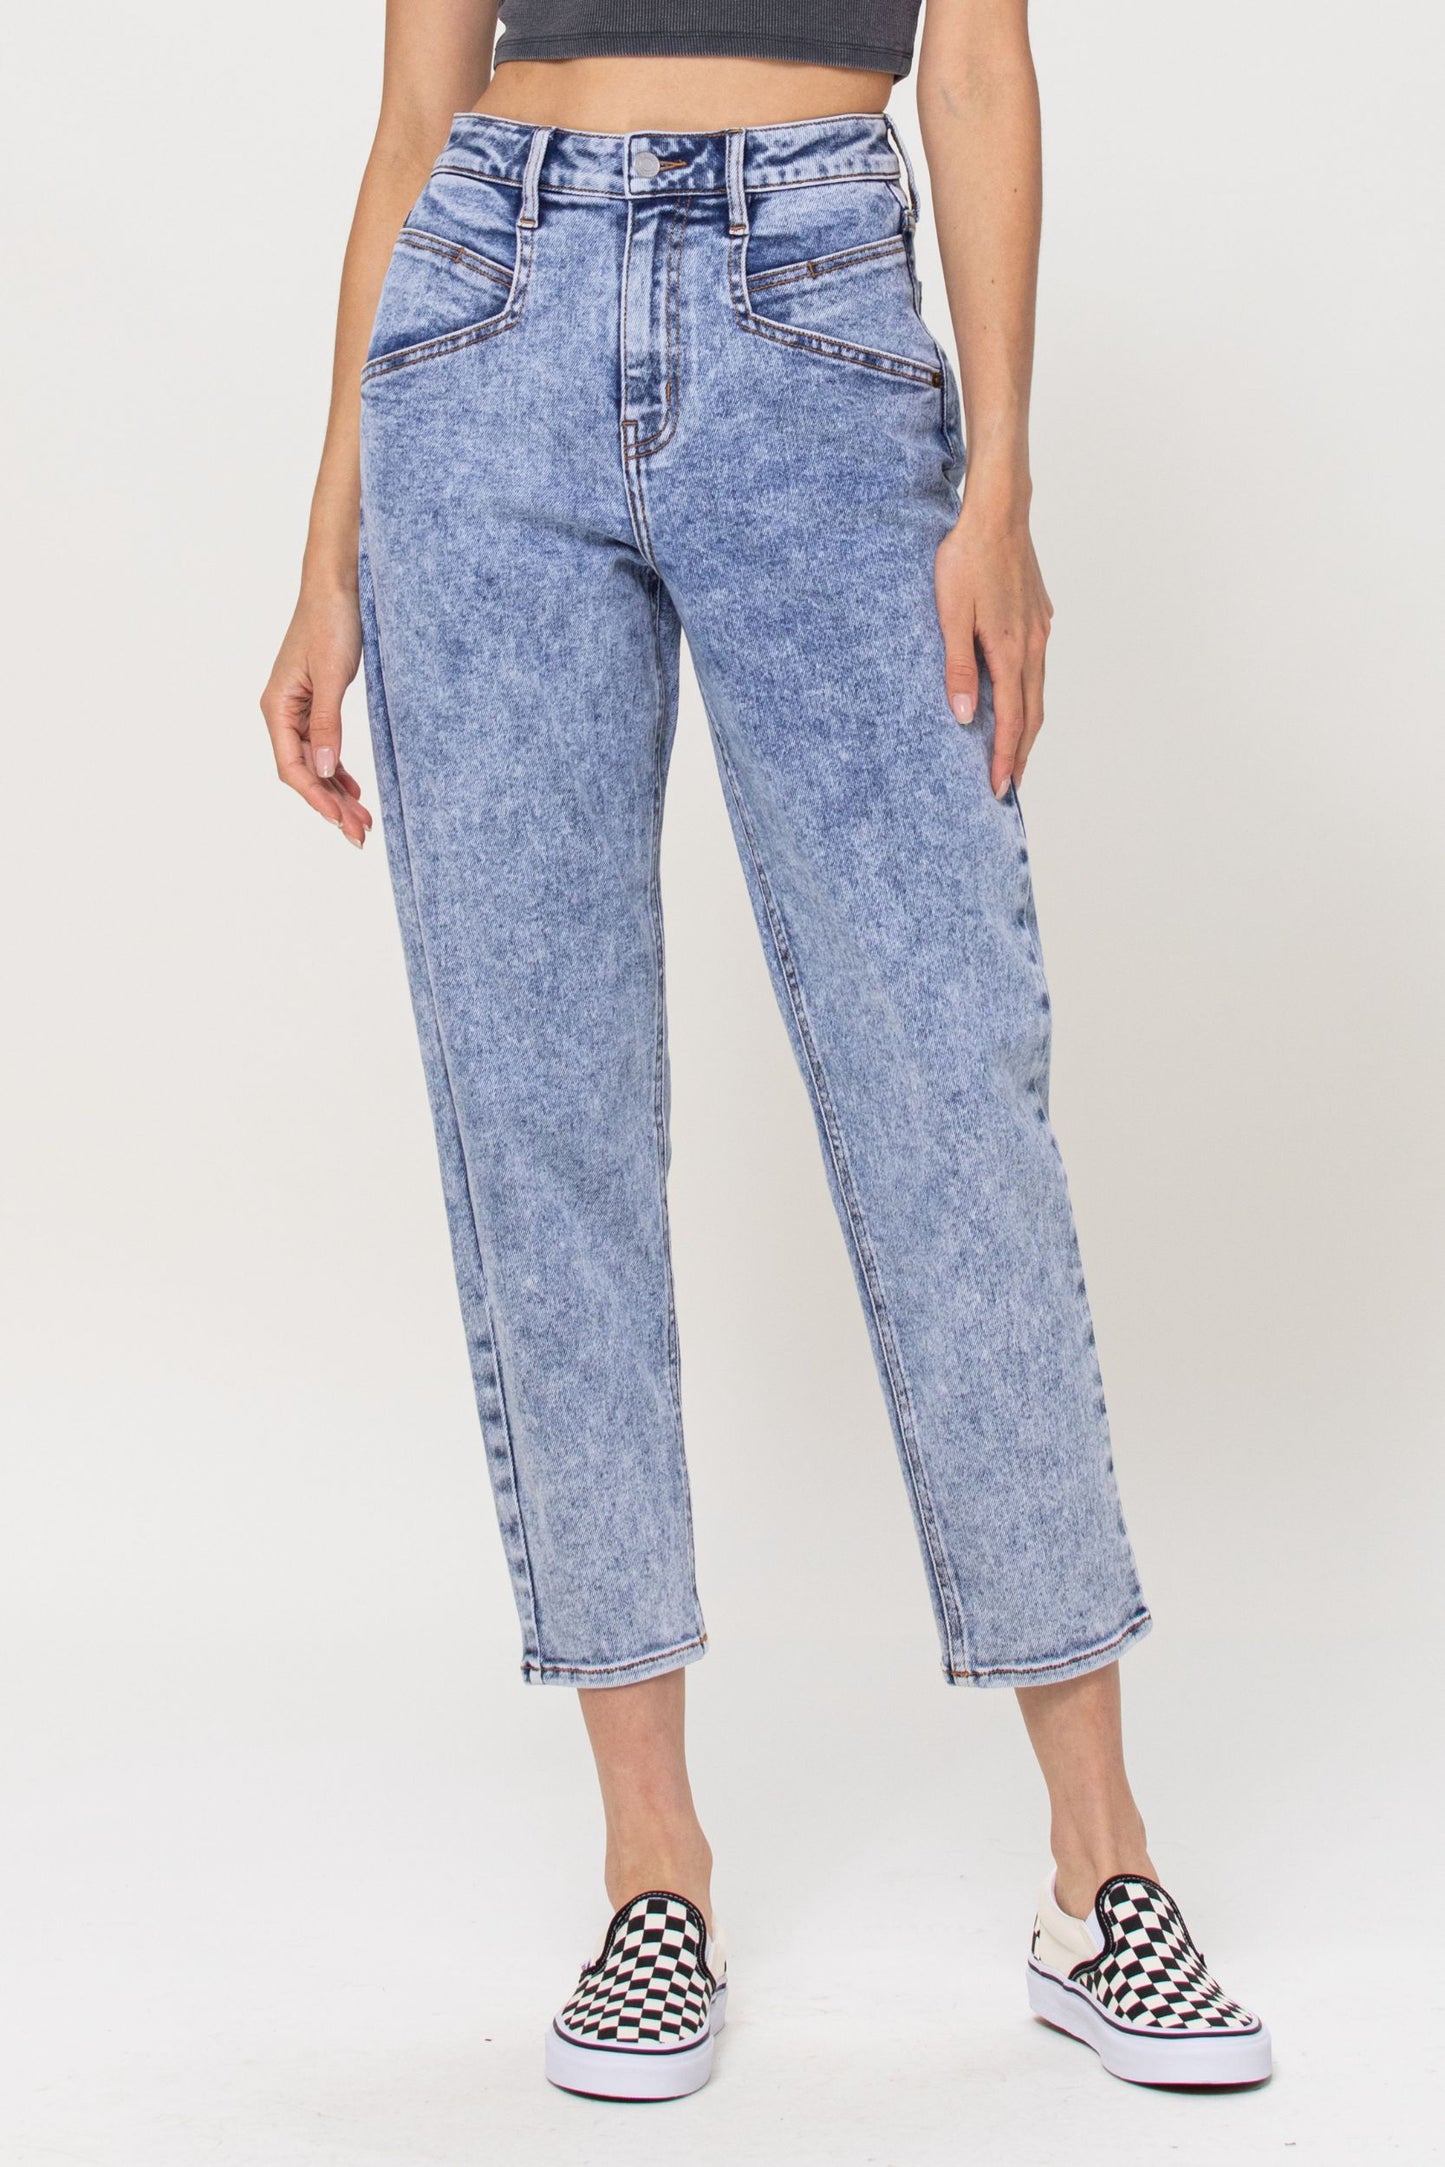 Cello Darcy Light Wash Detailed Mom Jean - Weeping Willow Boutique